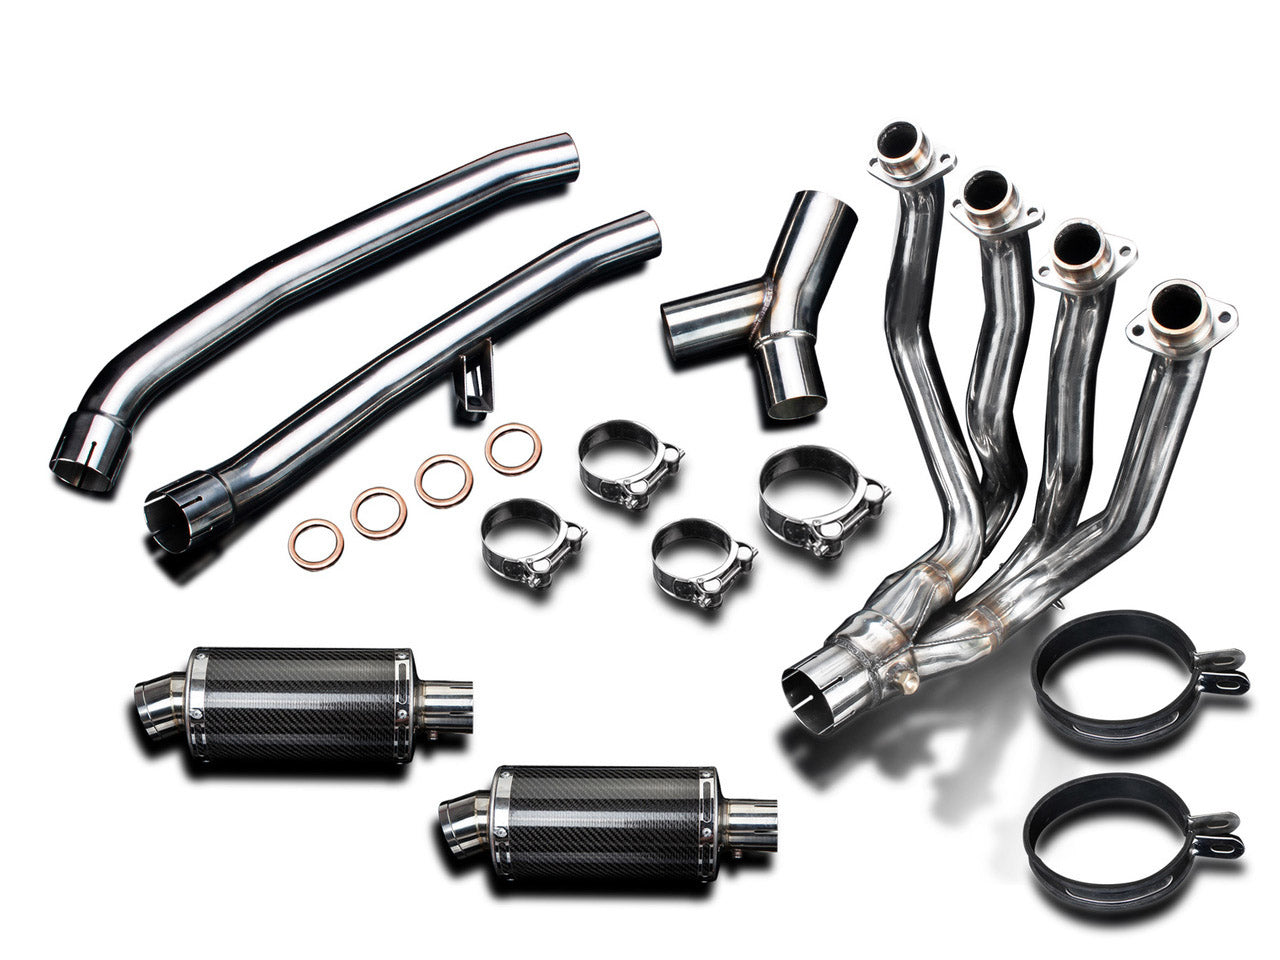 DELKEVIC Kawasaki Ninja ZX-14R Full Exhaust System with DS70 9" Carbon Silencers